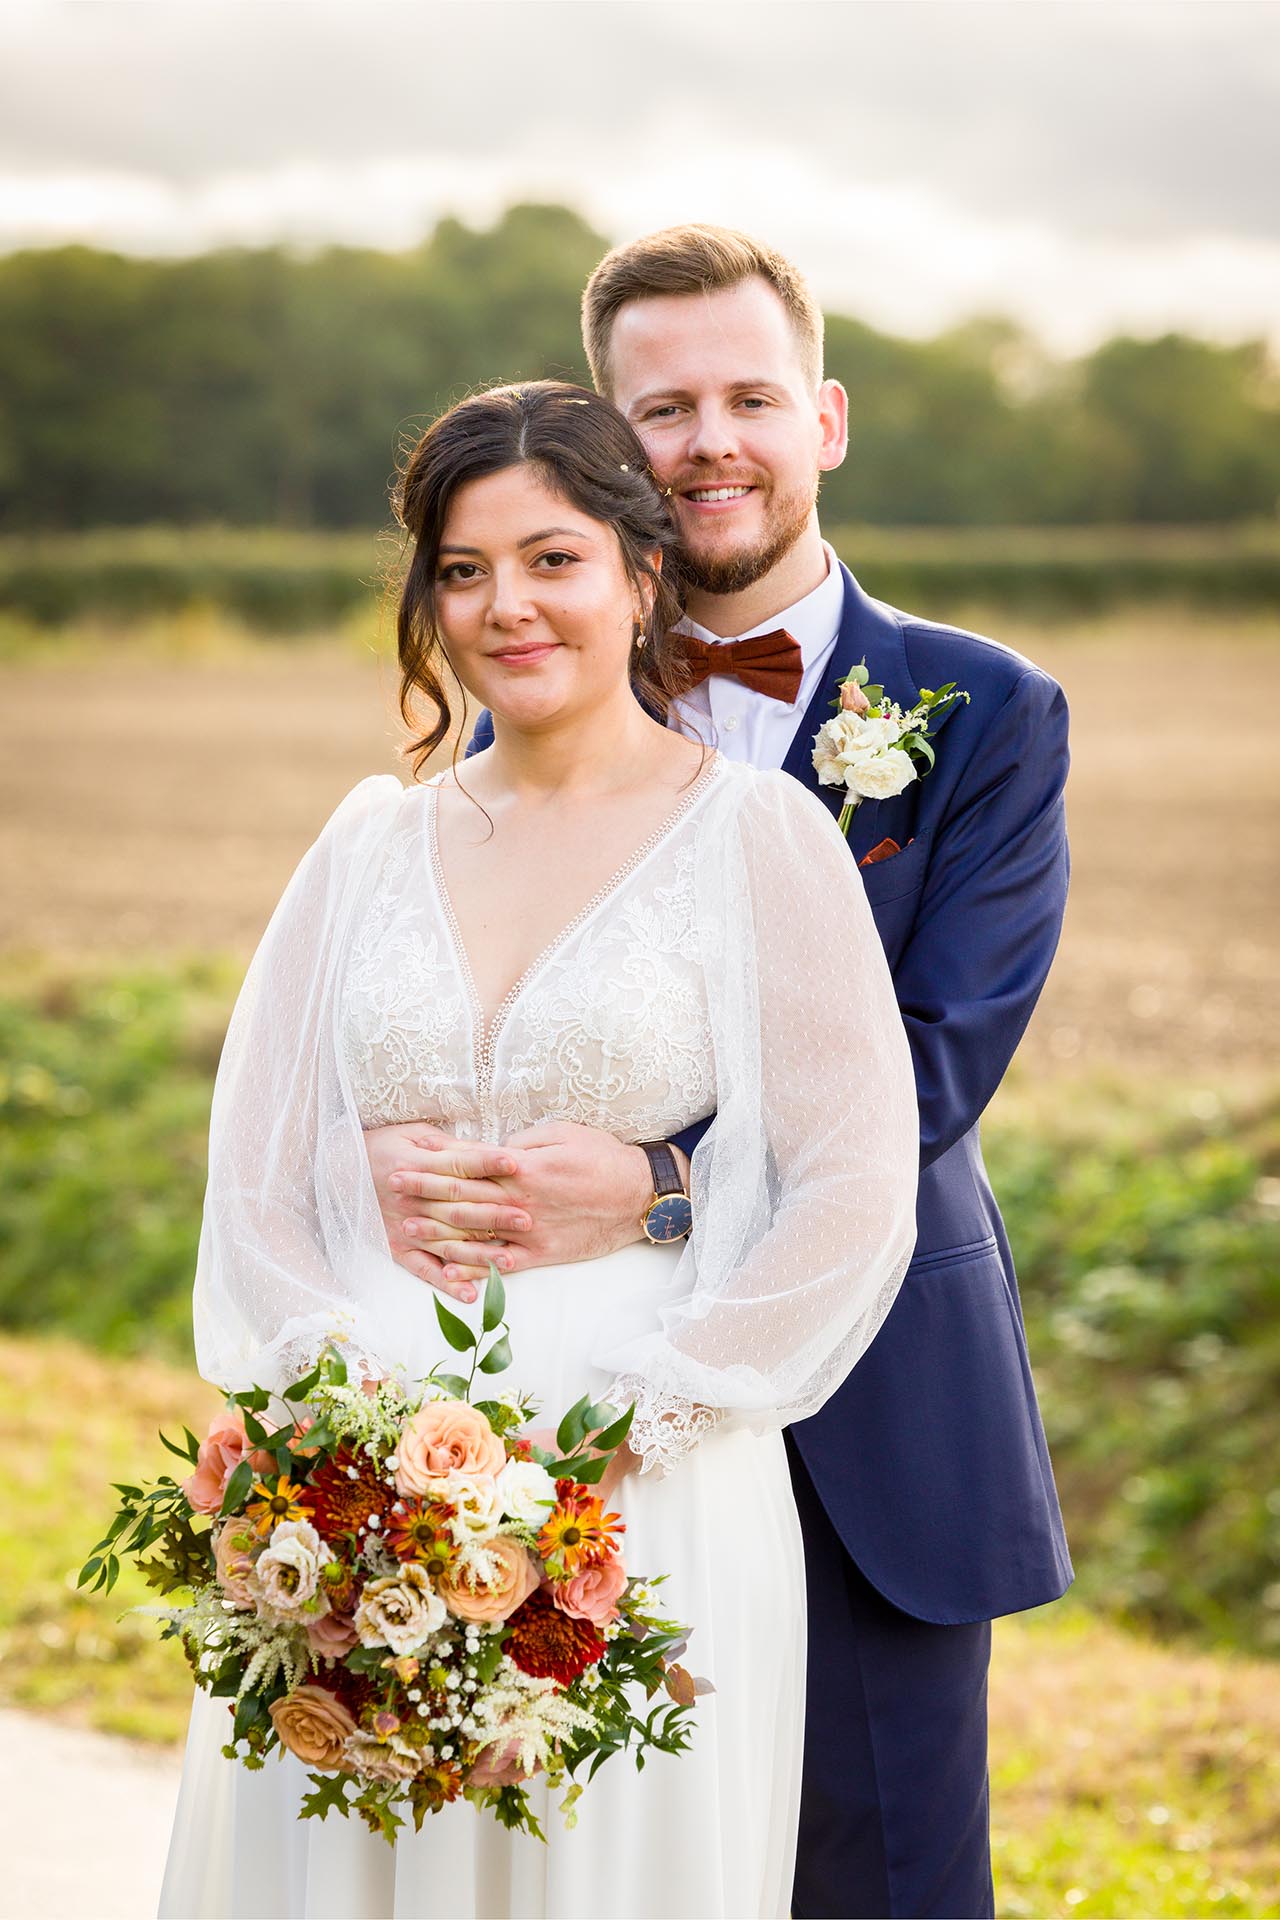 Bride and groom portrait by Essex wedding photographer at The Compasses at Pattiswick